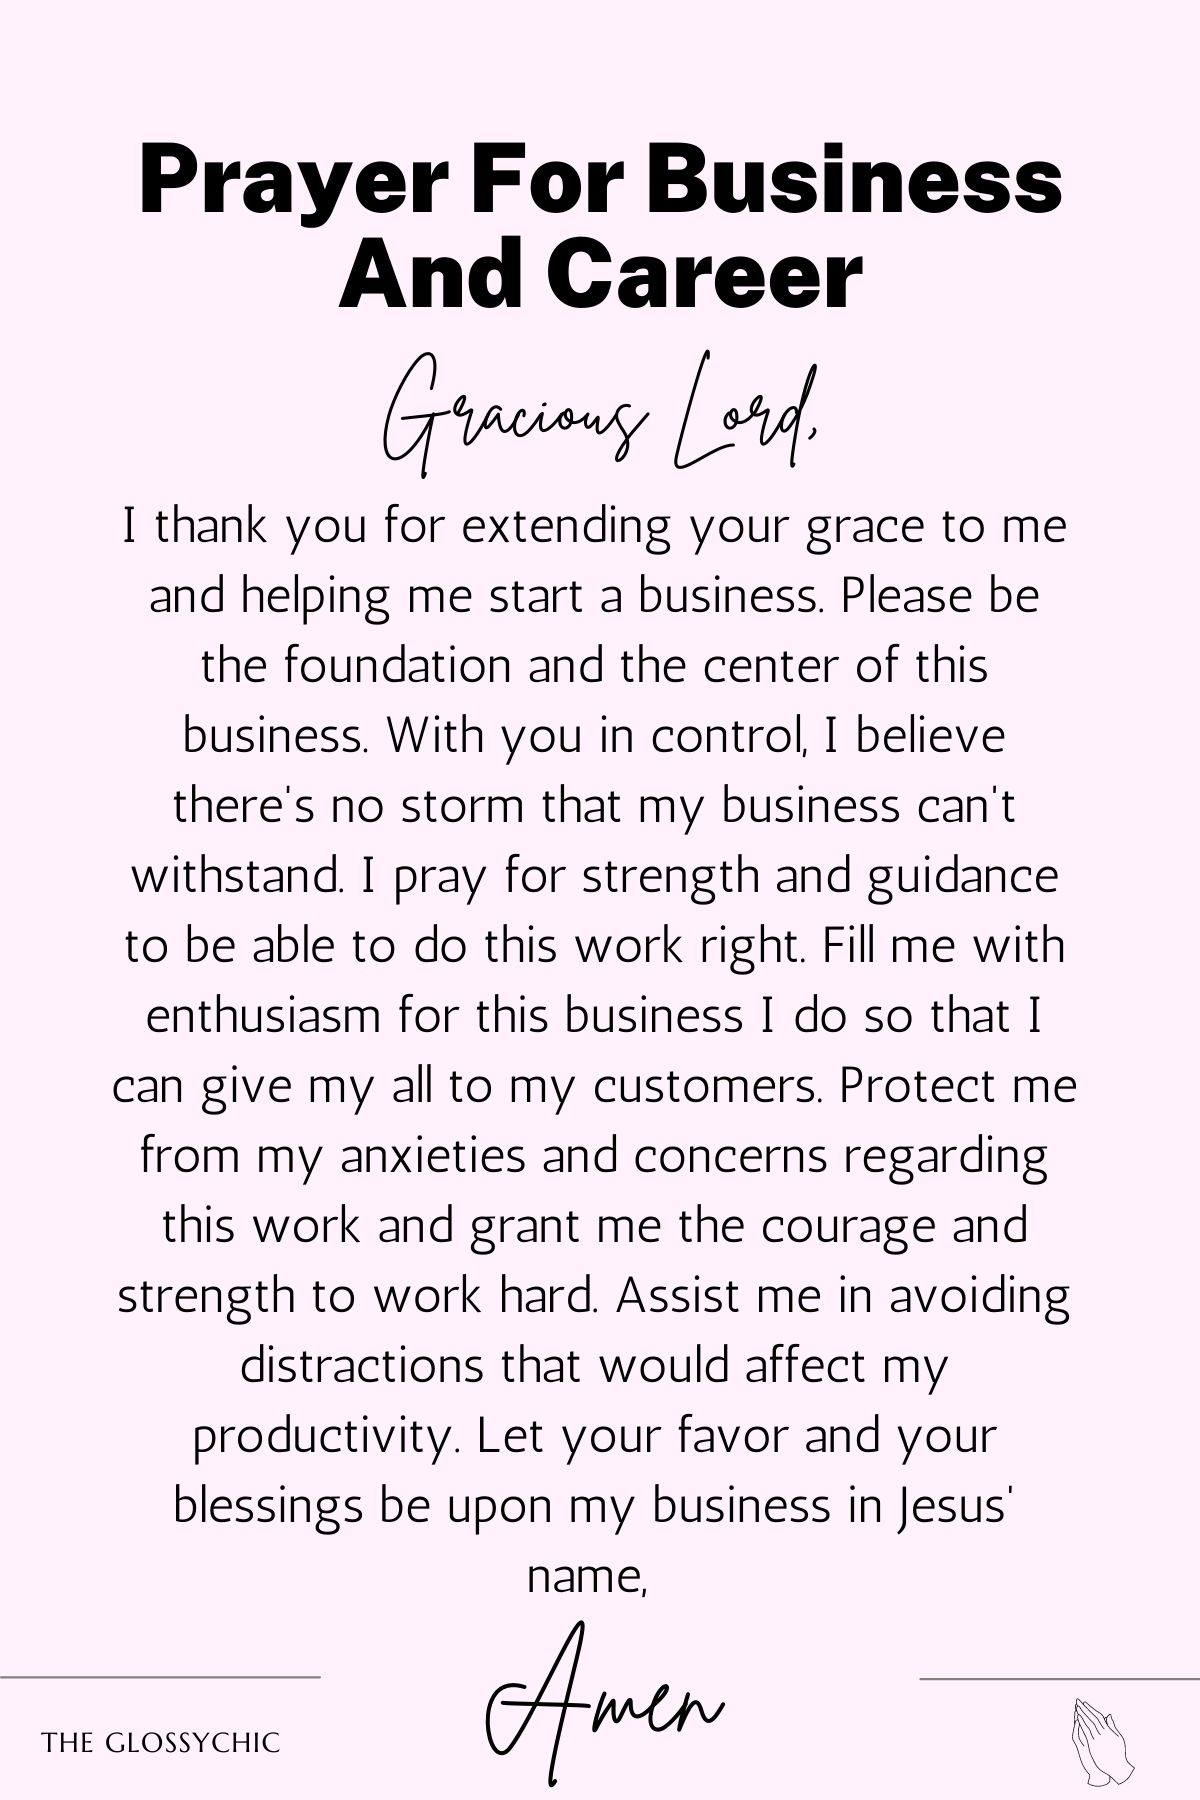 Prayer for business and career